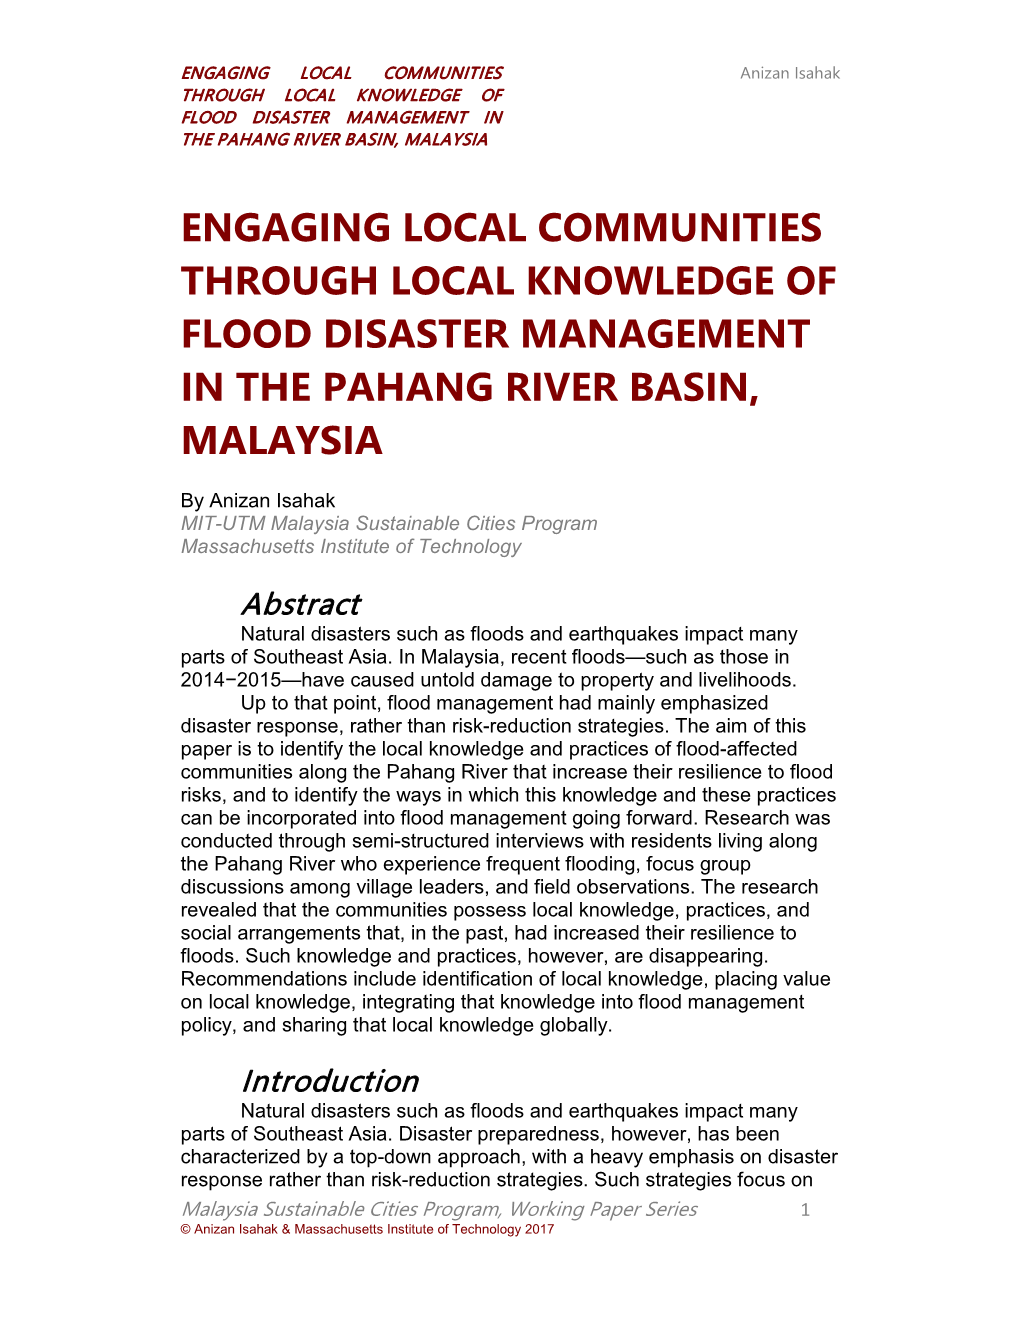 Engaging Local Communities Through Local Knowledge of Flood Disaster Management in the Pahang River Basin